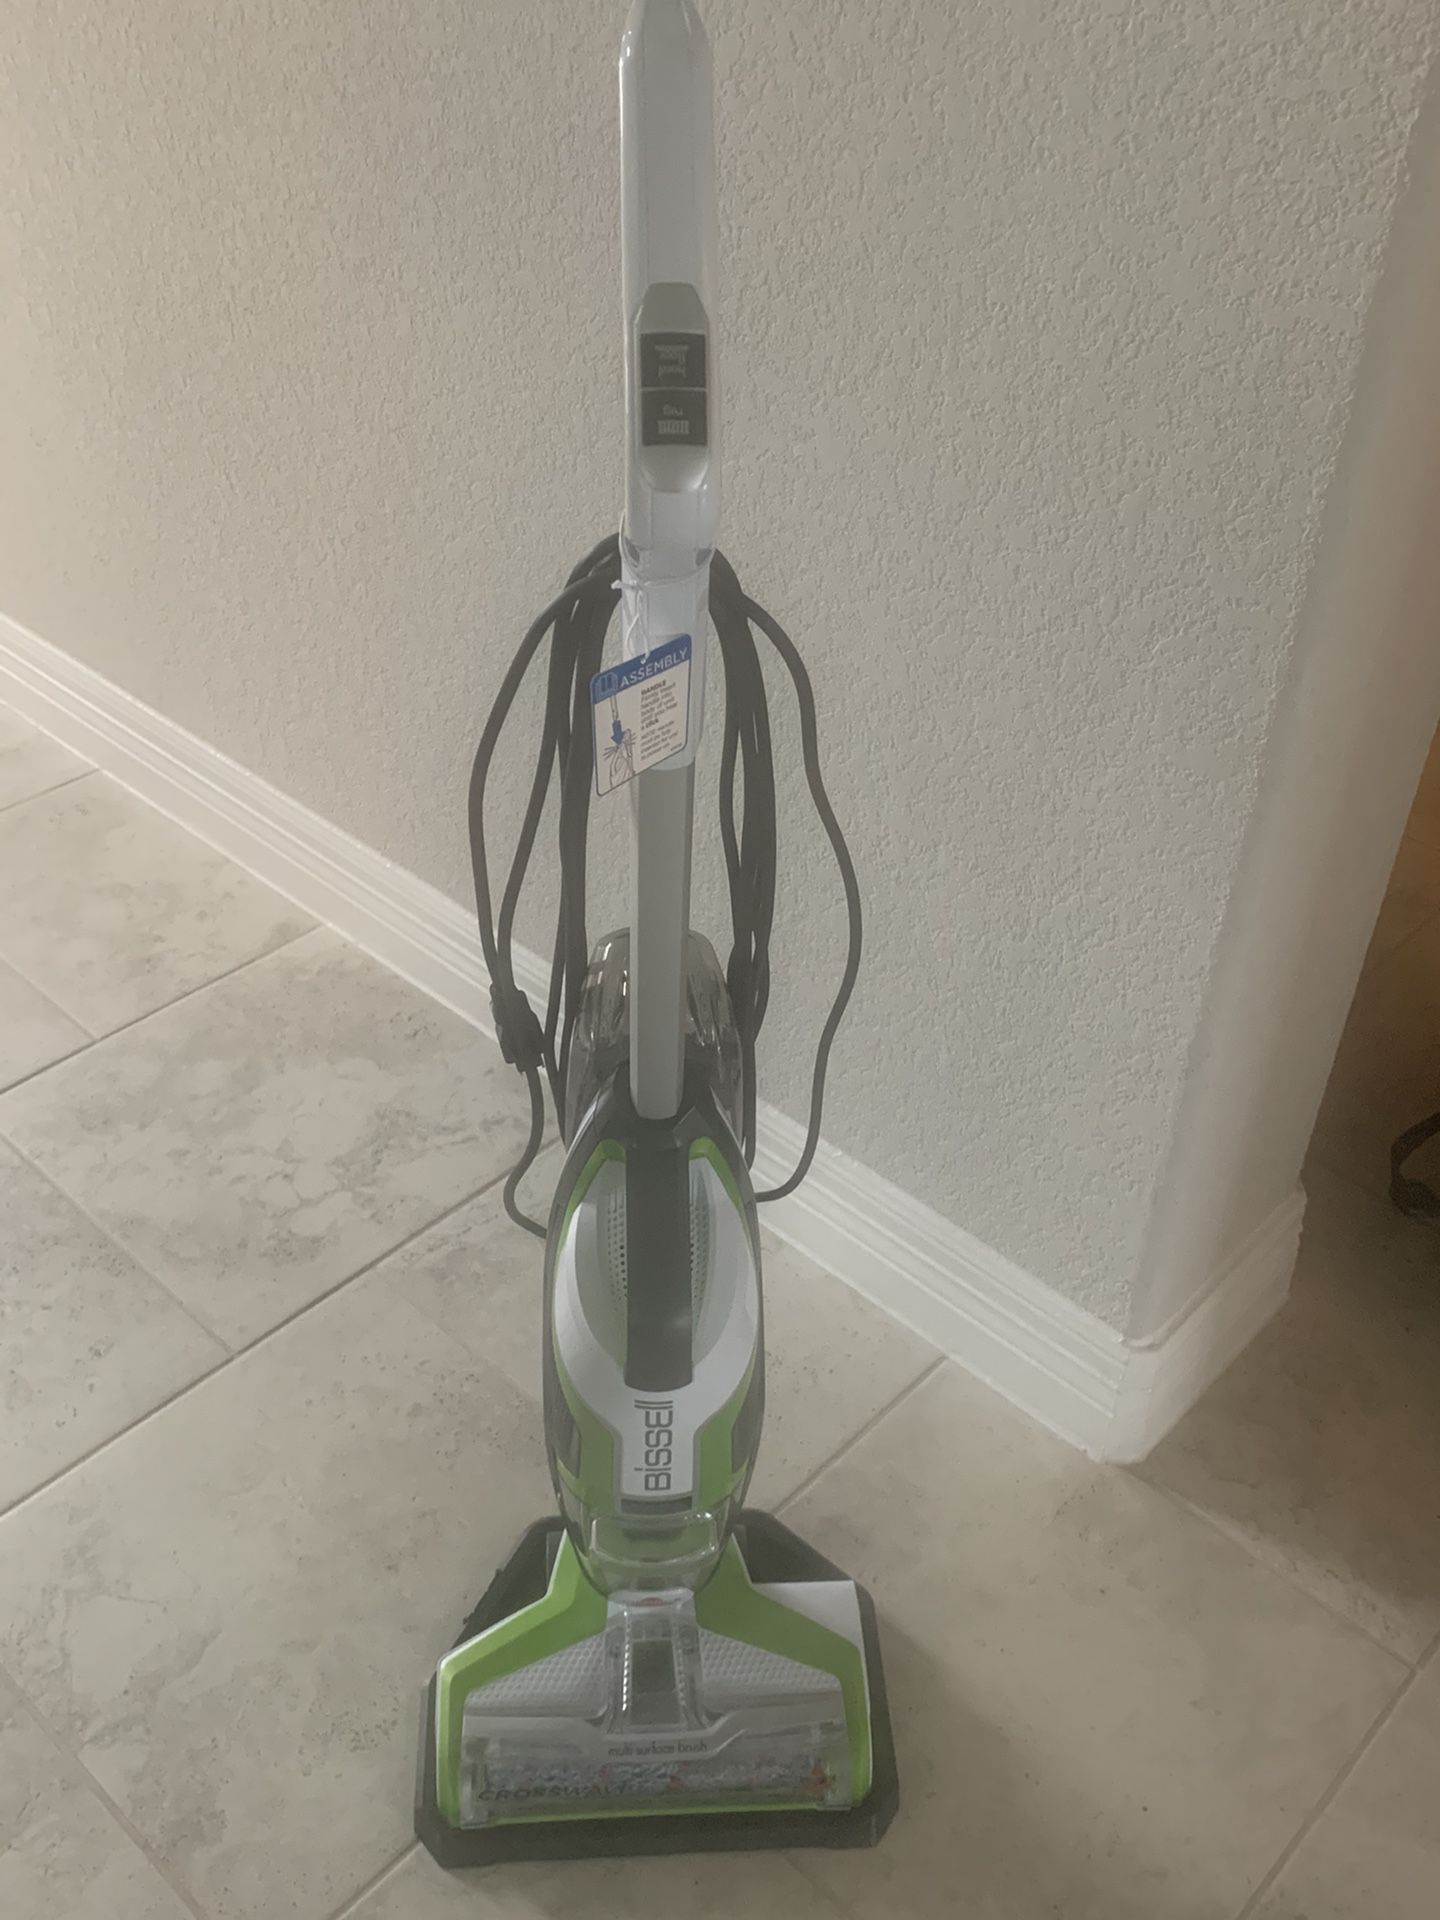 Bissell Crosswave 2 in 1 vacuum and floor cleaner like new